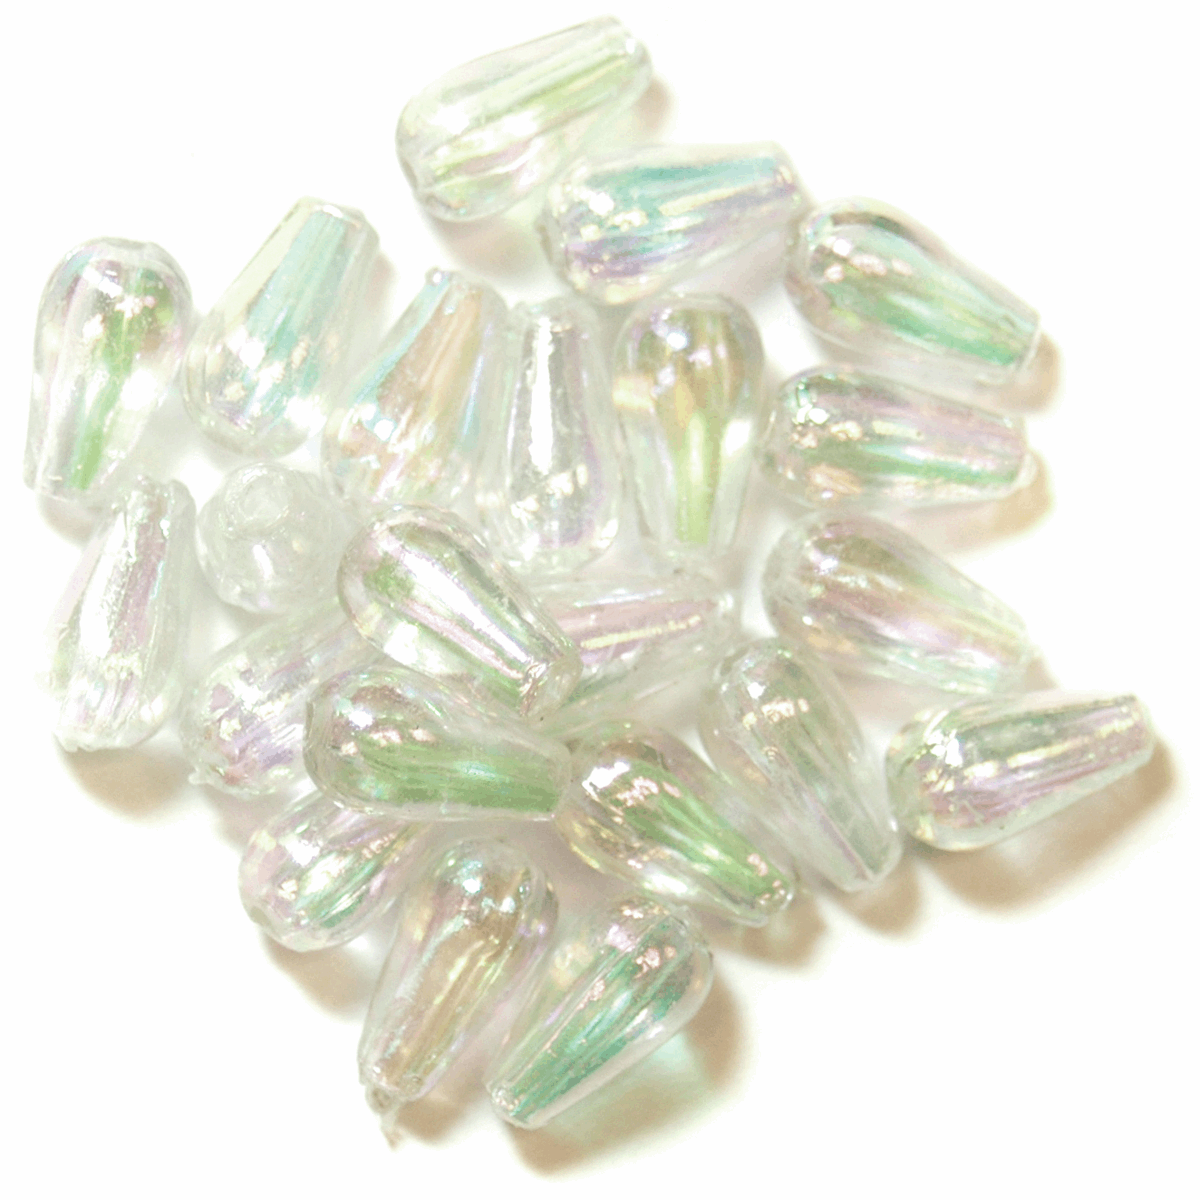 Trimits Aurora Pearl Drop Beads - 9mm (Pack of 60)